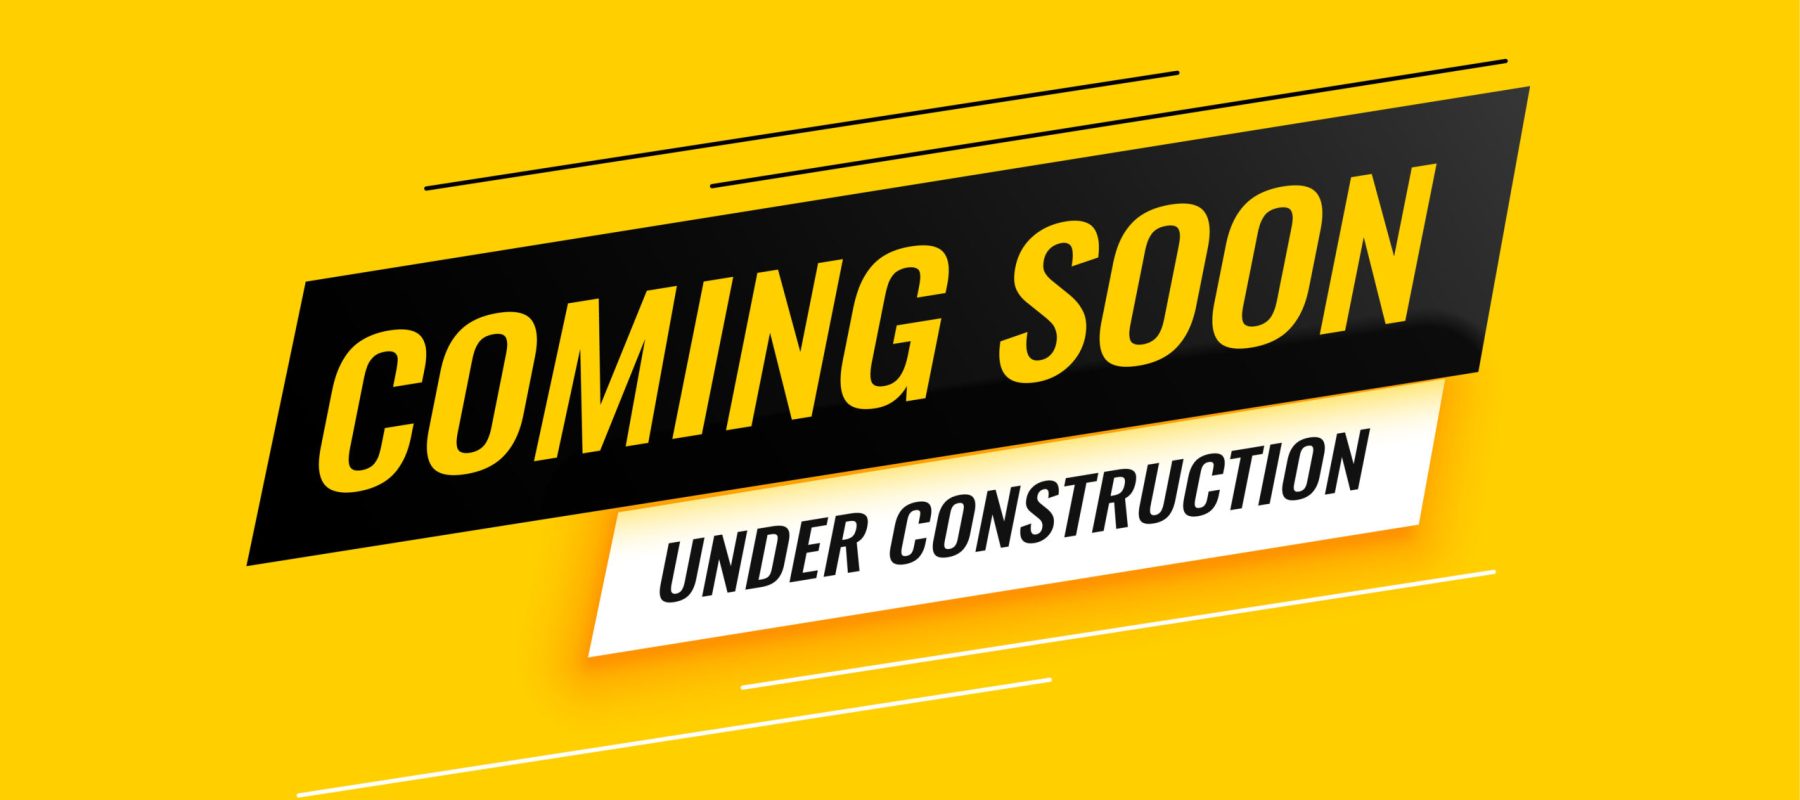 coming soon under construction yellow background design